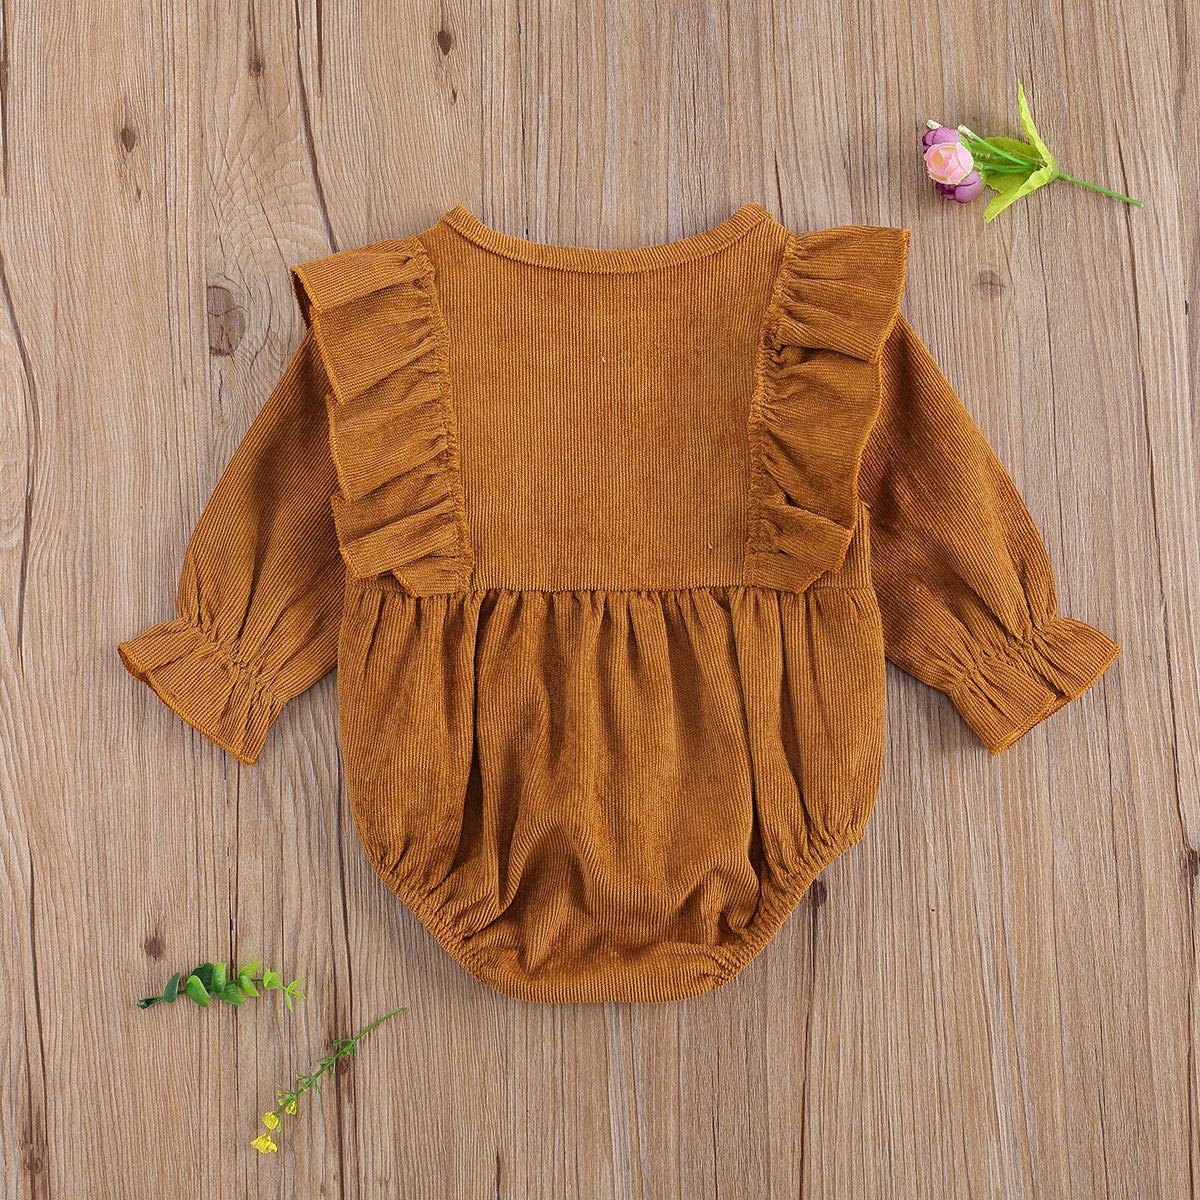 Infant Baby Girl Clothes Solid Ruffle Long Sleeve Romper Bodysuit Tops One Piece Jumpsuit Fall Winter Outfit 3-6 Months